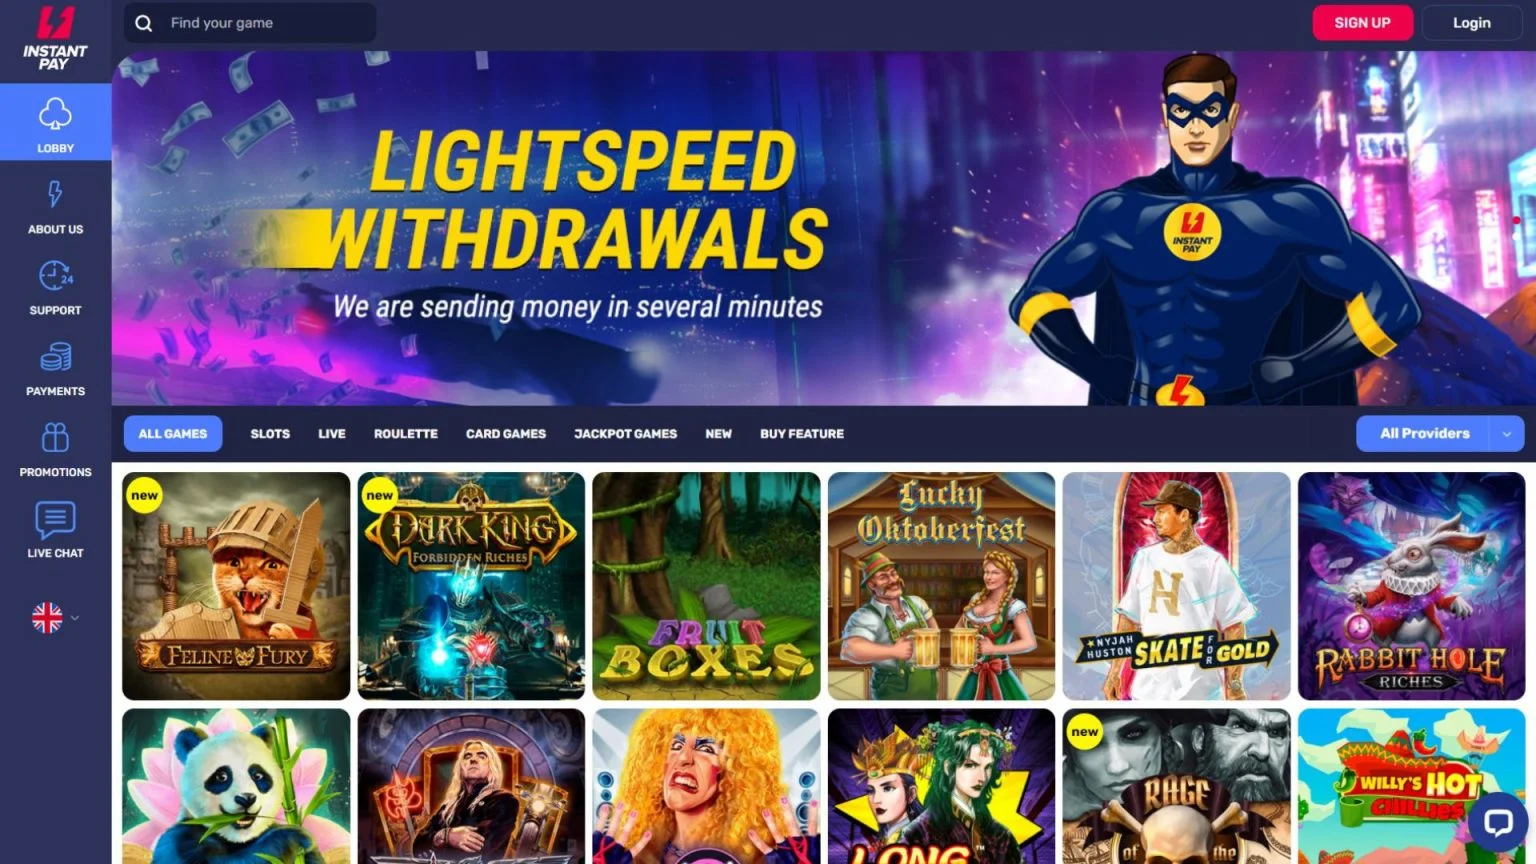 InstantPay Casino Welcomes You with a 100% Bonus up to 100 EUR + 100 Free Spins!